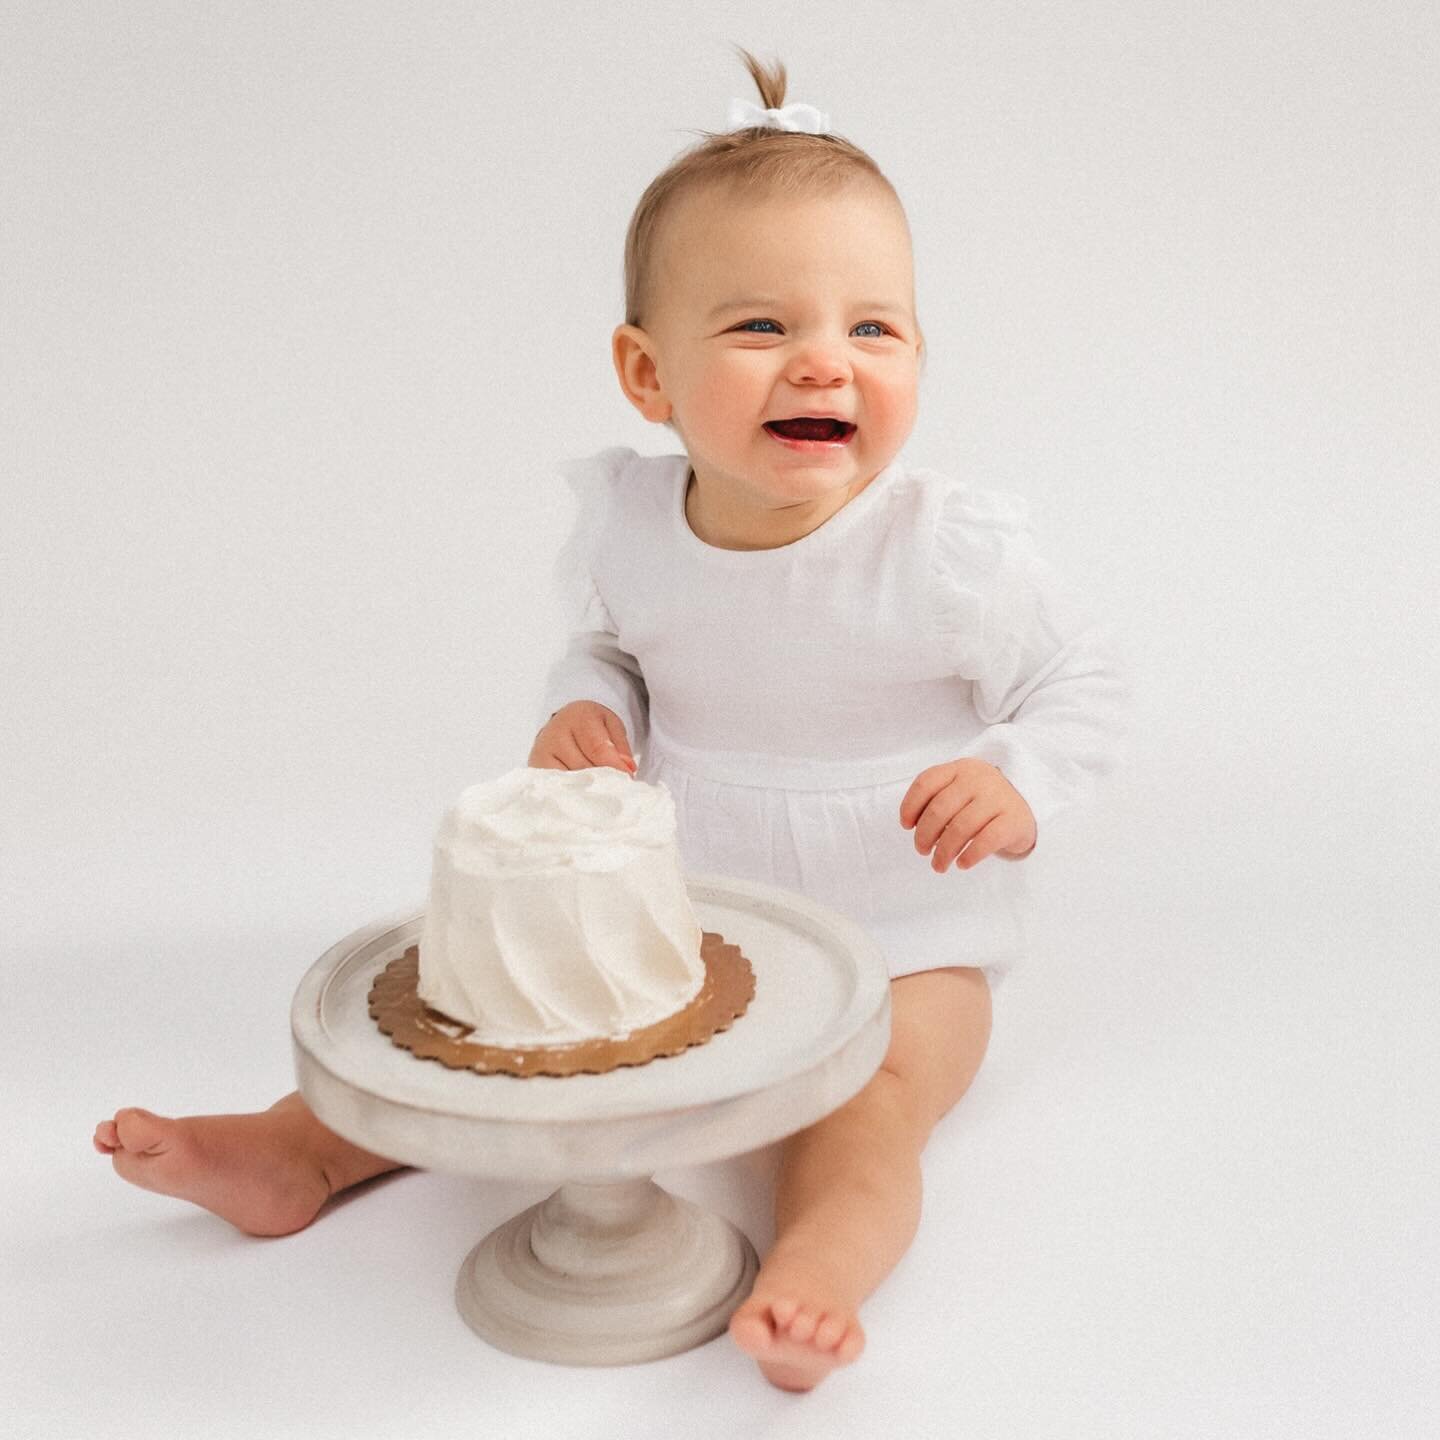 Did you know that I do all white sessions in my garage? These are really simple and really quick sessions to document your child&rsquo;s milestones. They are great for cake smashes! The all white keeps the focus on what&rsquo;s important&hellip;.your